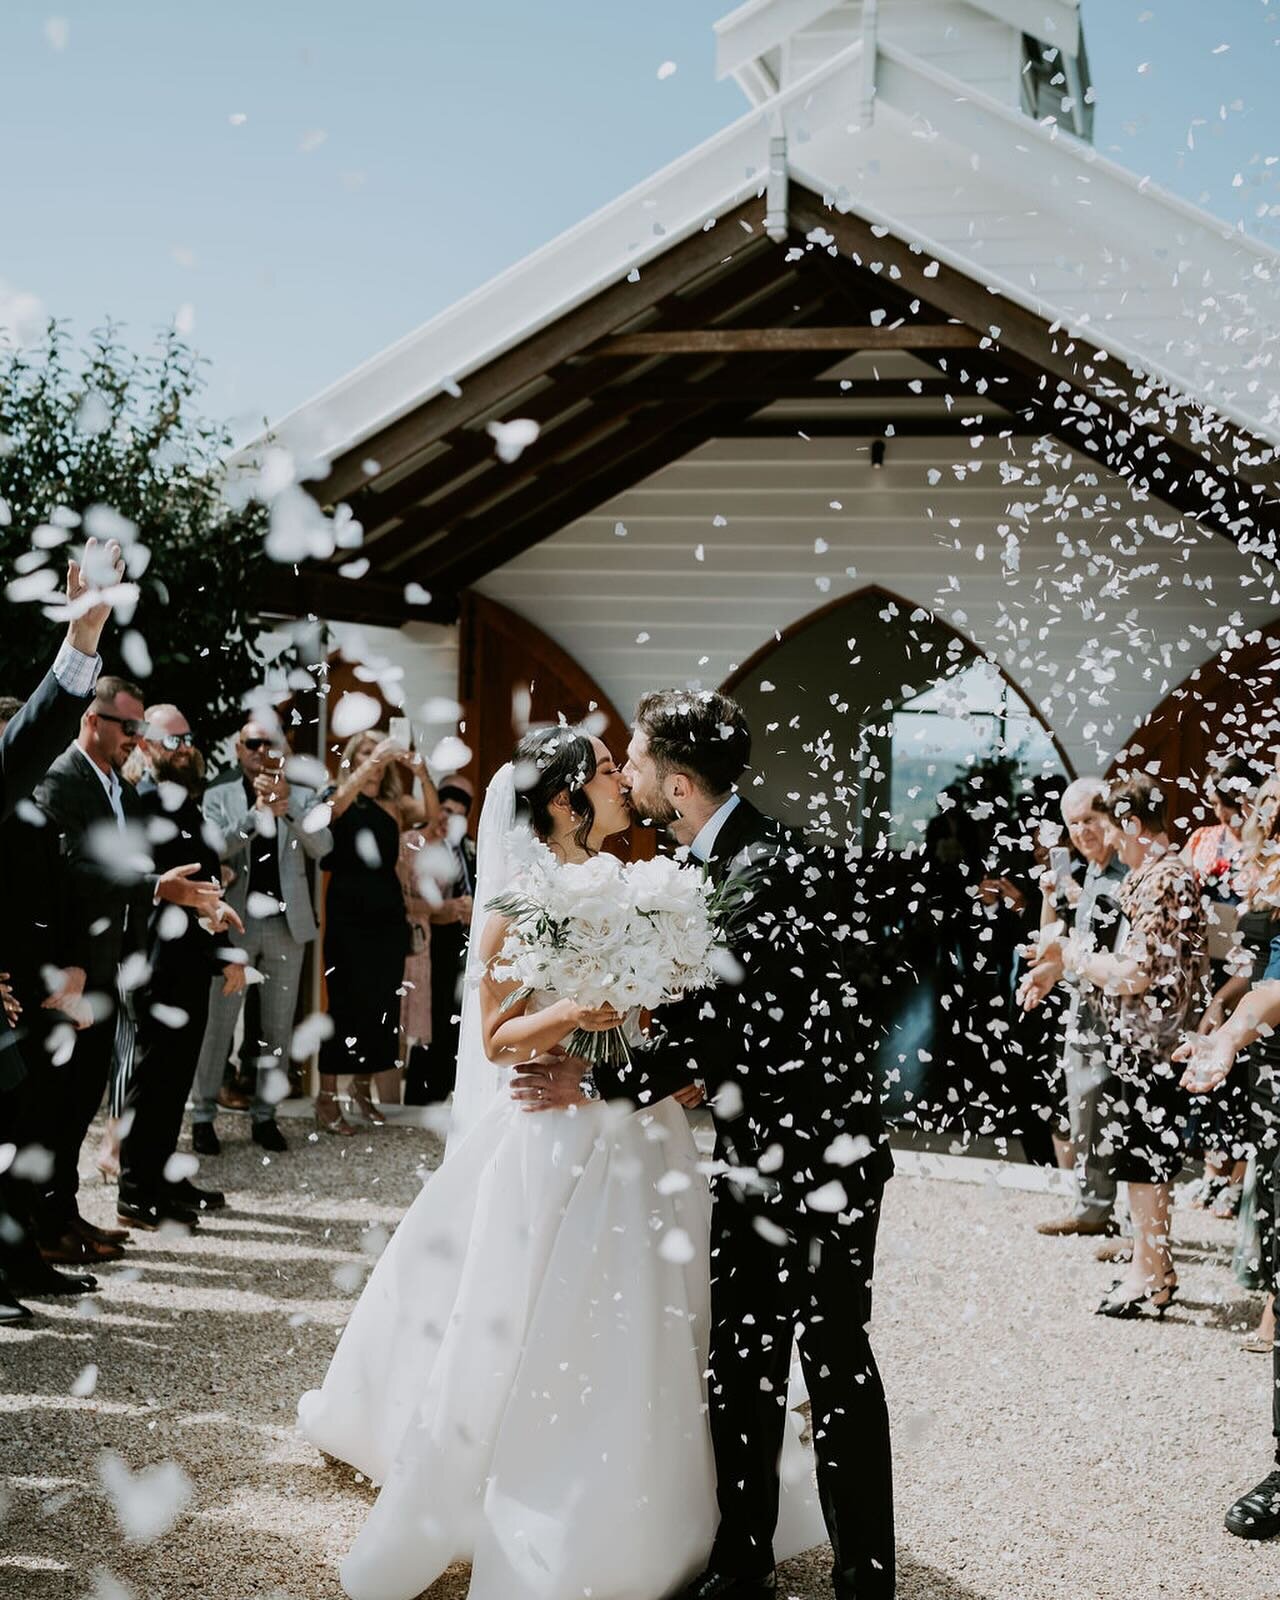 Looking for ways to spice up your ceremony? 🌶️

Here are a few guaranteed crowd-pleasers to get your guests involved and bring the vibes ❤️&zwj;🔥

+ Invite guests to take out their phones, snap a group selfie and send it to you before we kickoff yo